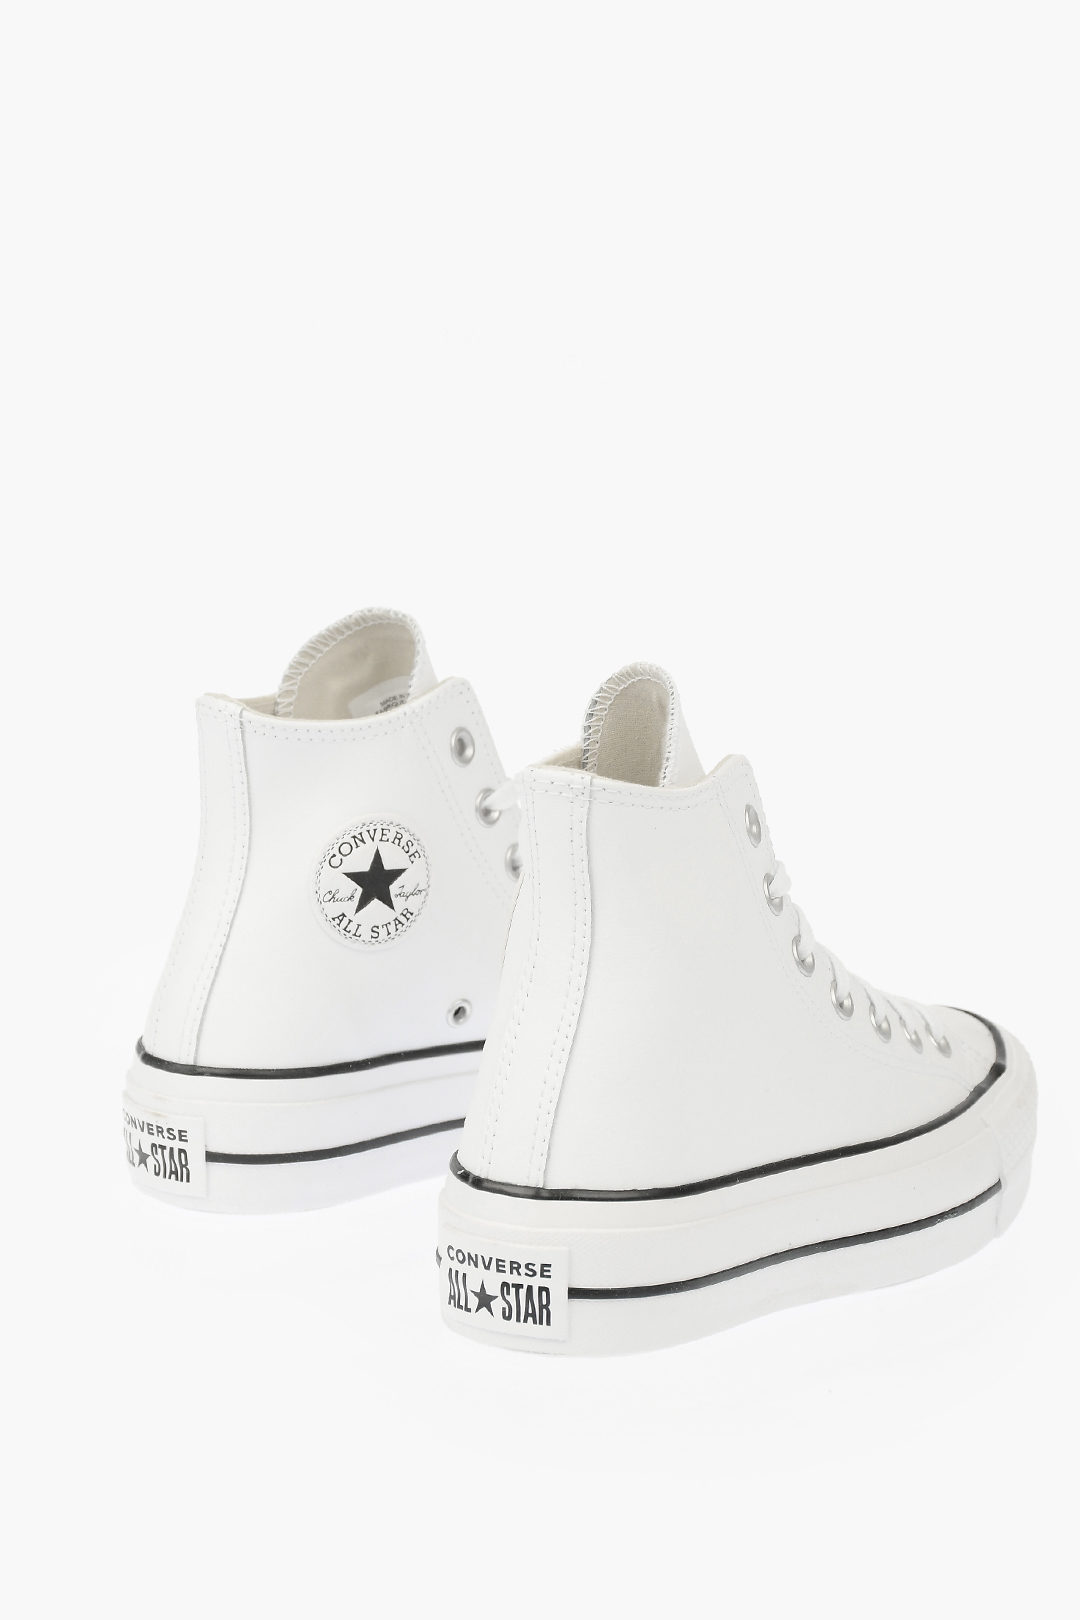 George Hanbury Grasp Site line Converse ALL STAR 4cm Fabric Sneakers with Platform women - Glamood Outlet